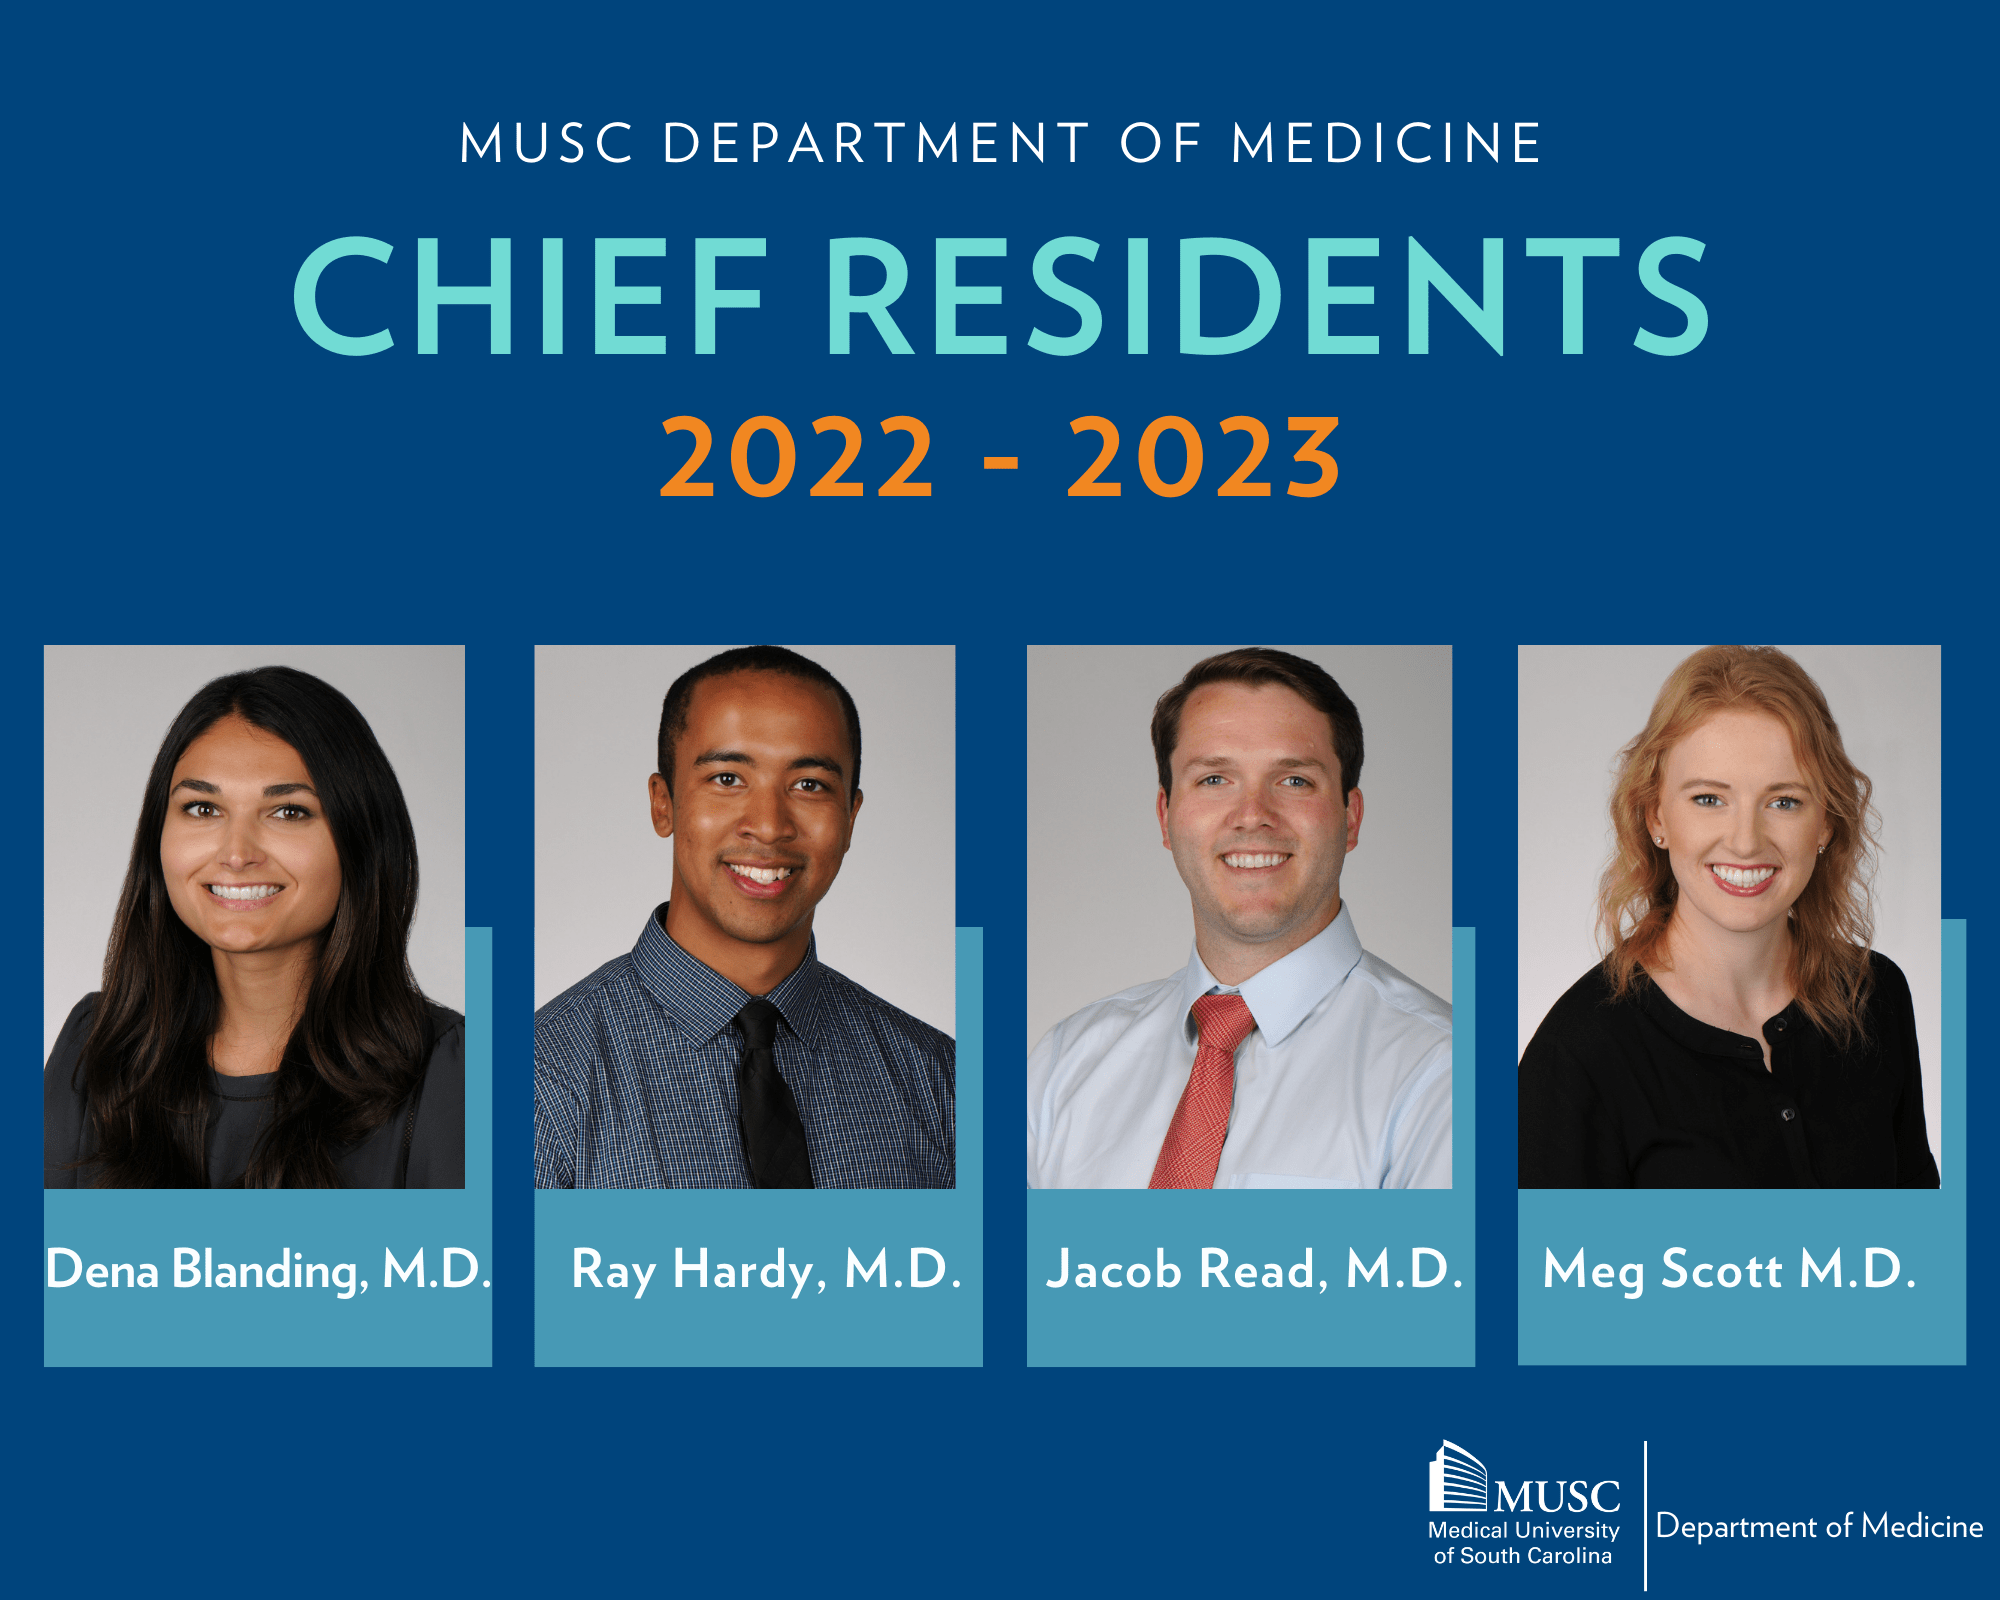 Chief residents 2022 - 2023